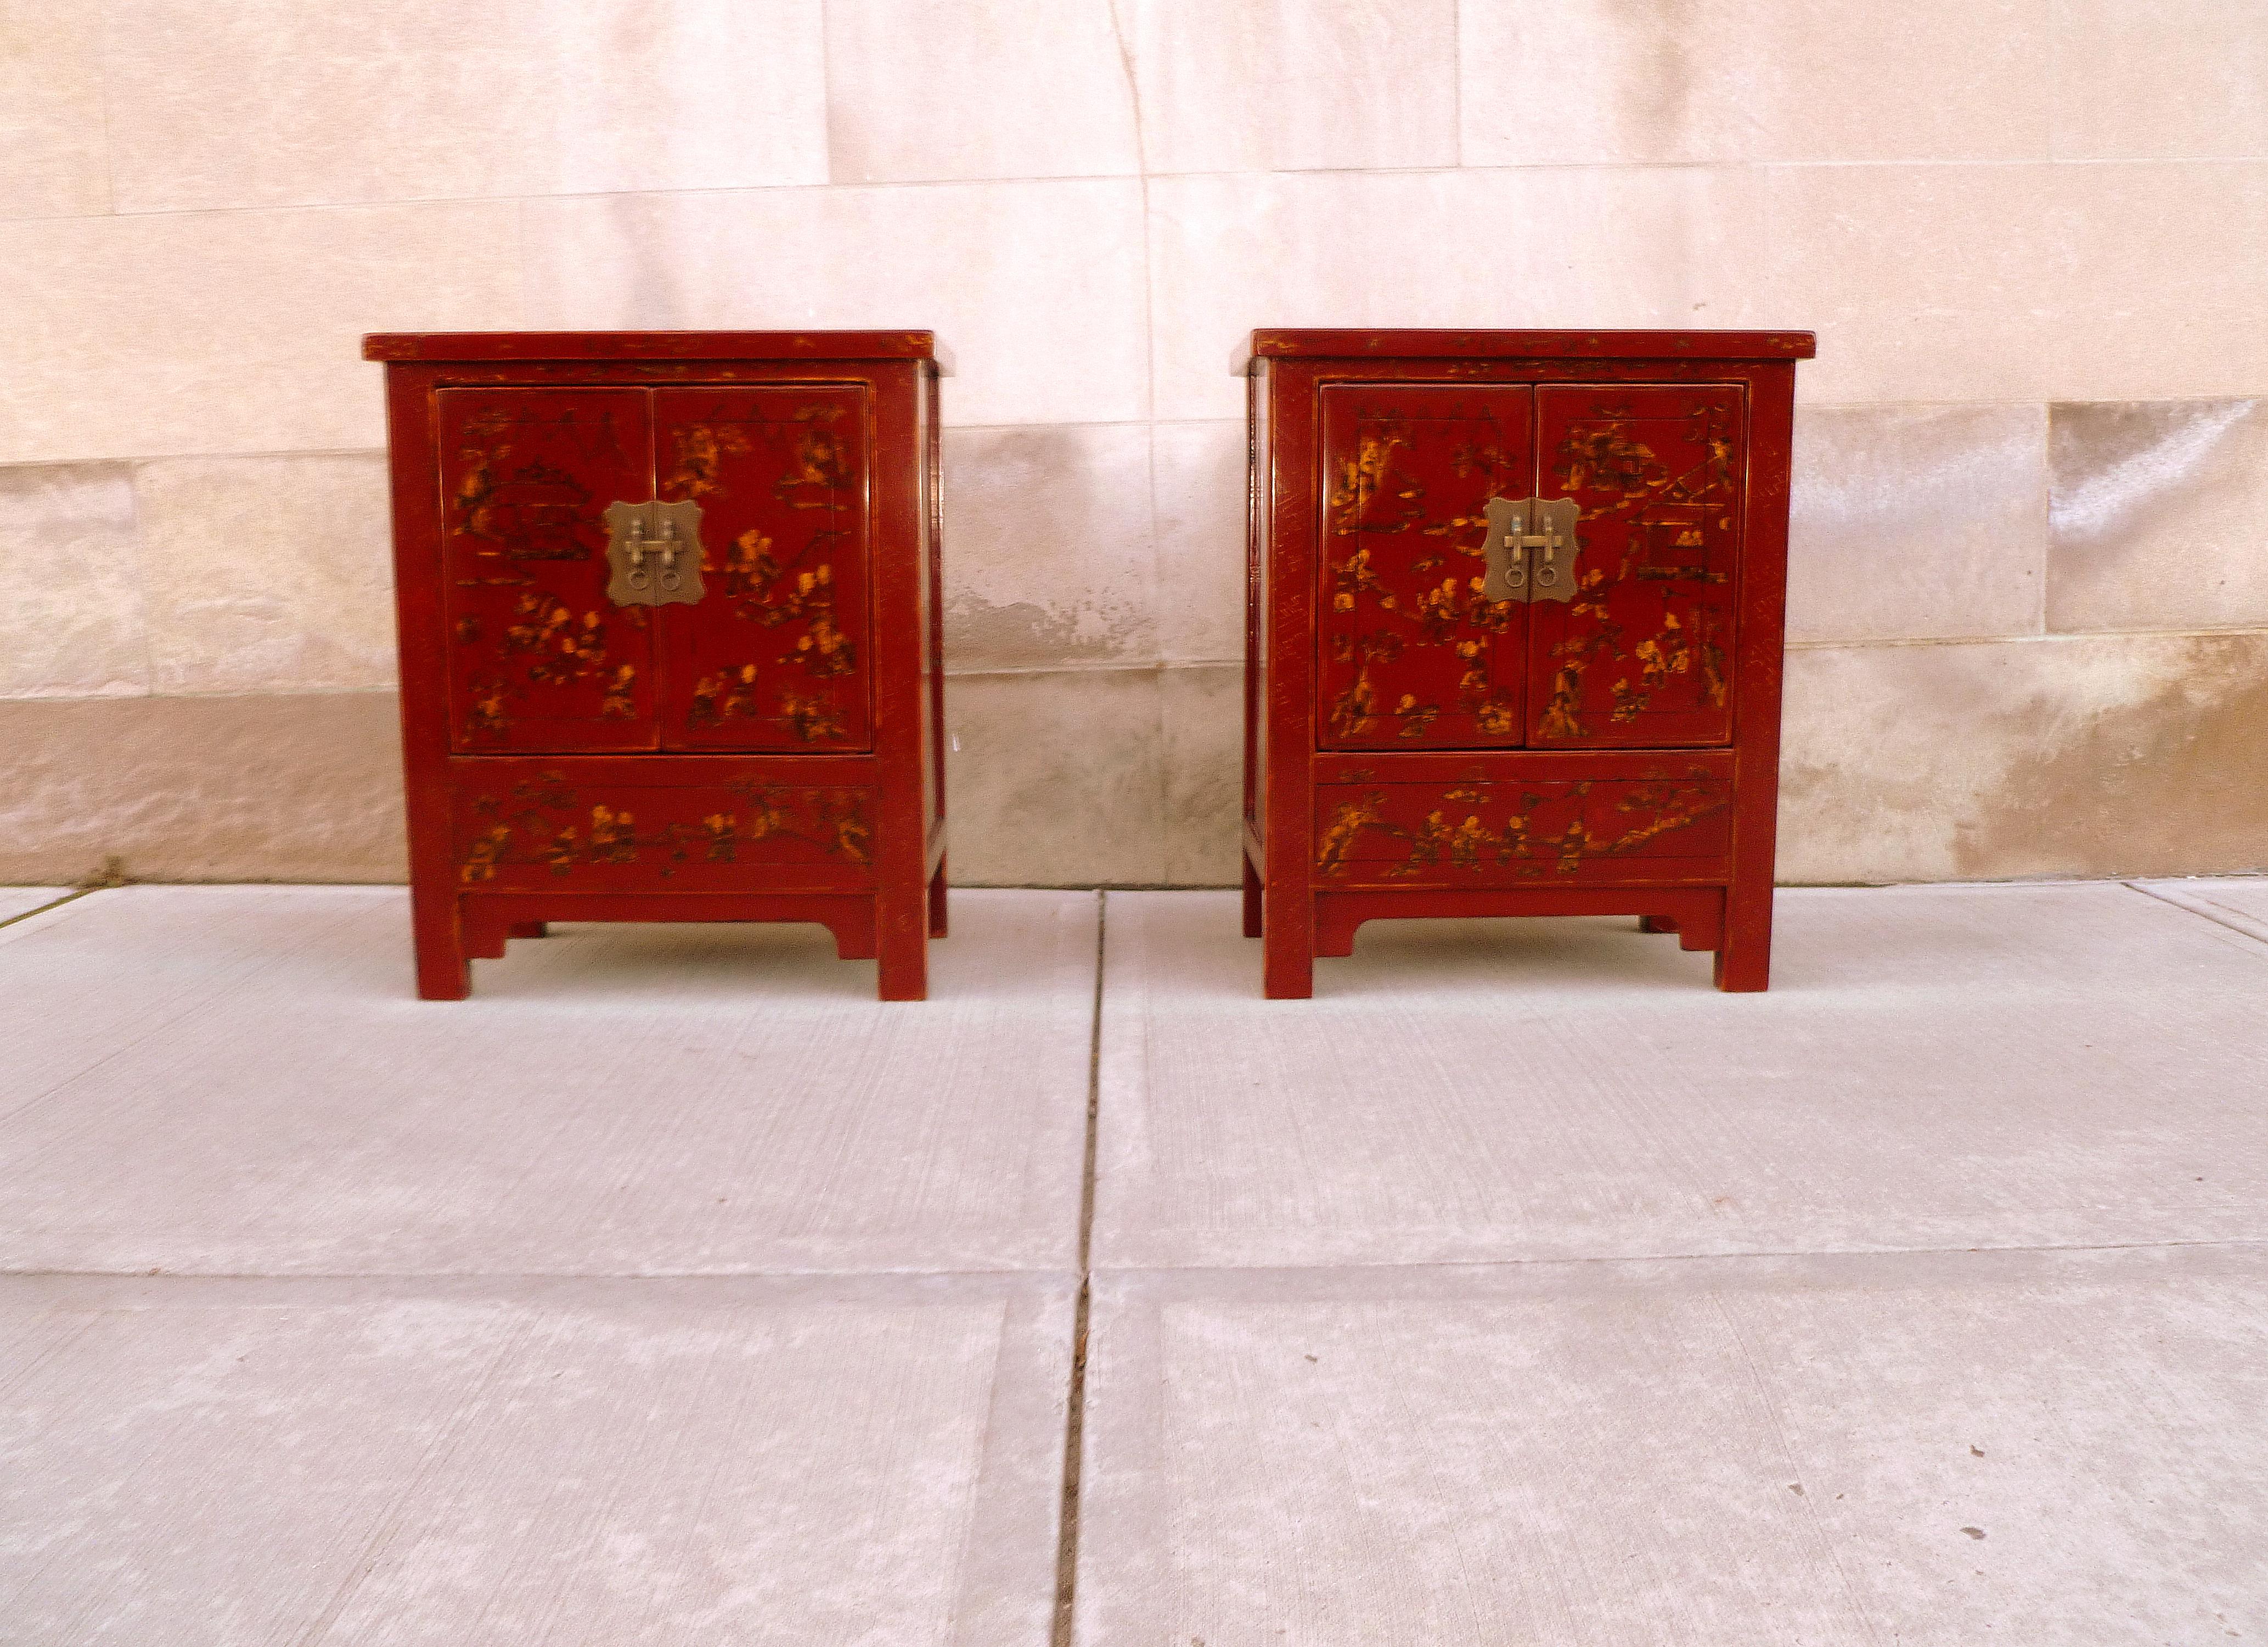 A pair of fine red lacquer chests with hand-painted gold gilt motif, beautiful color, form and lines.